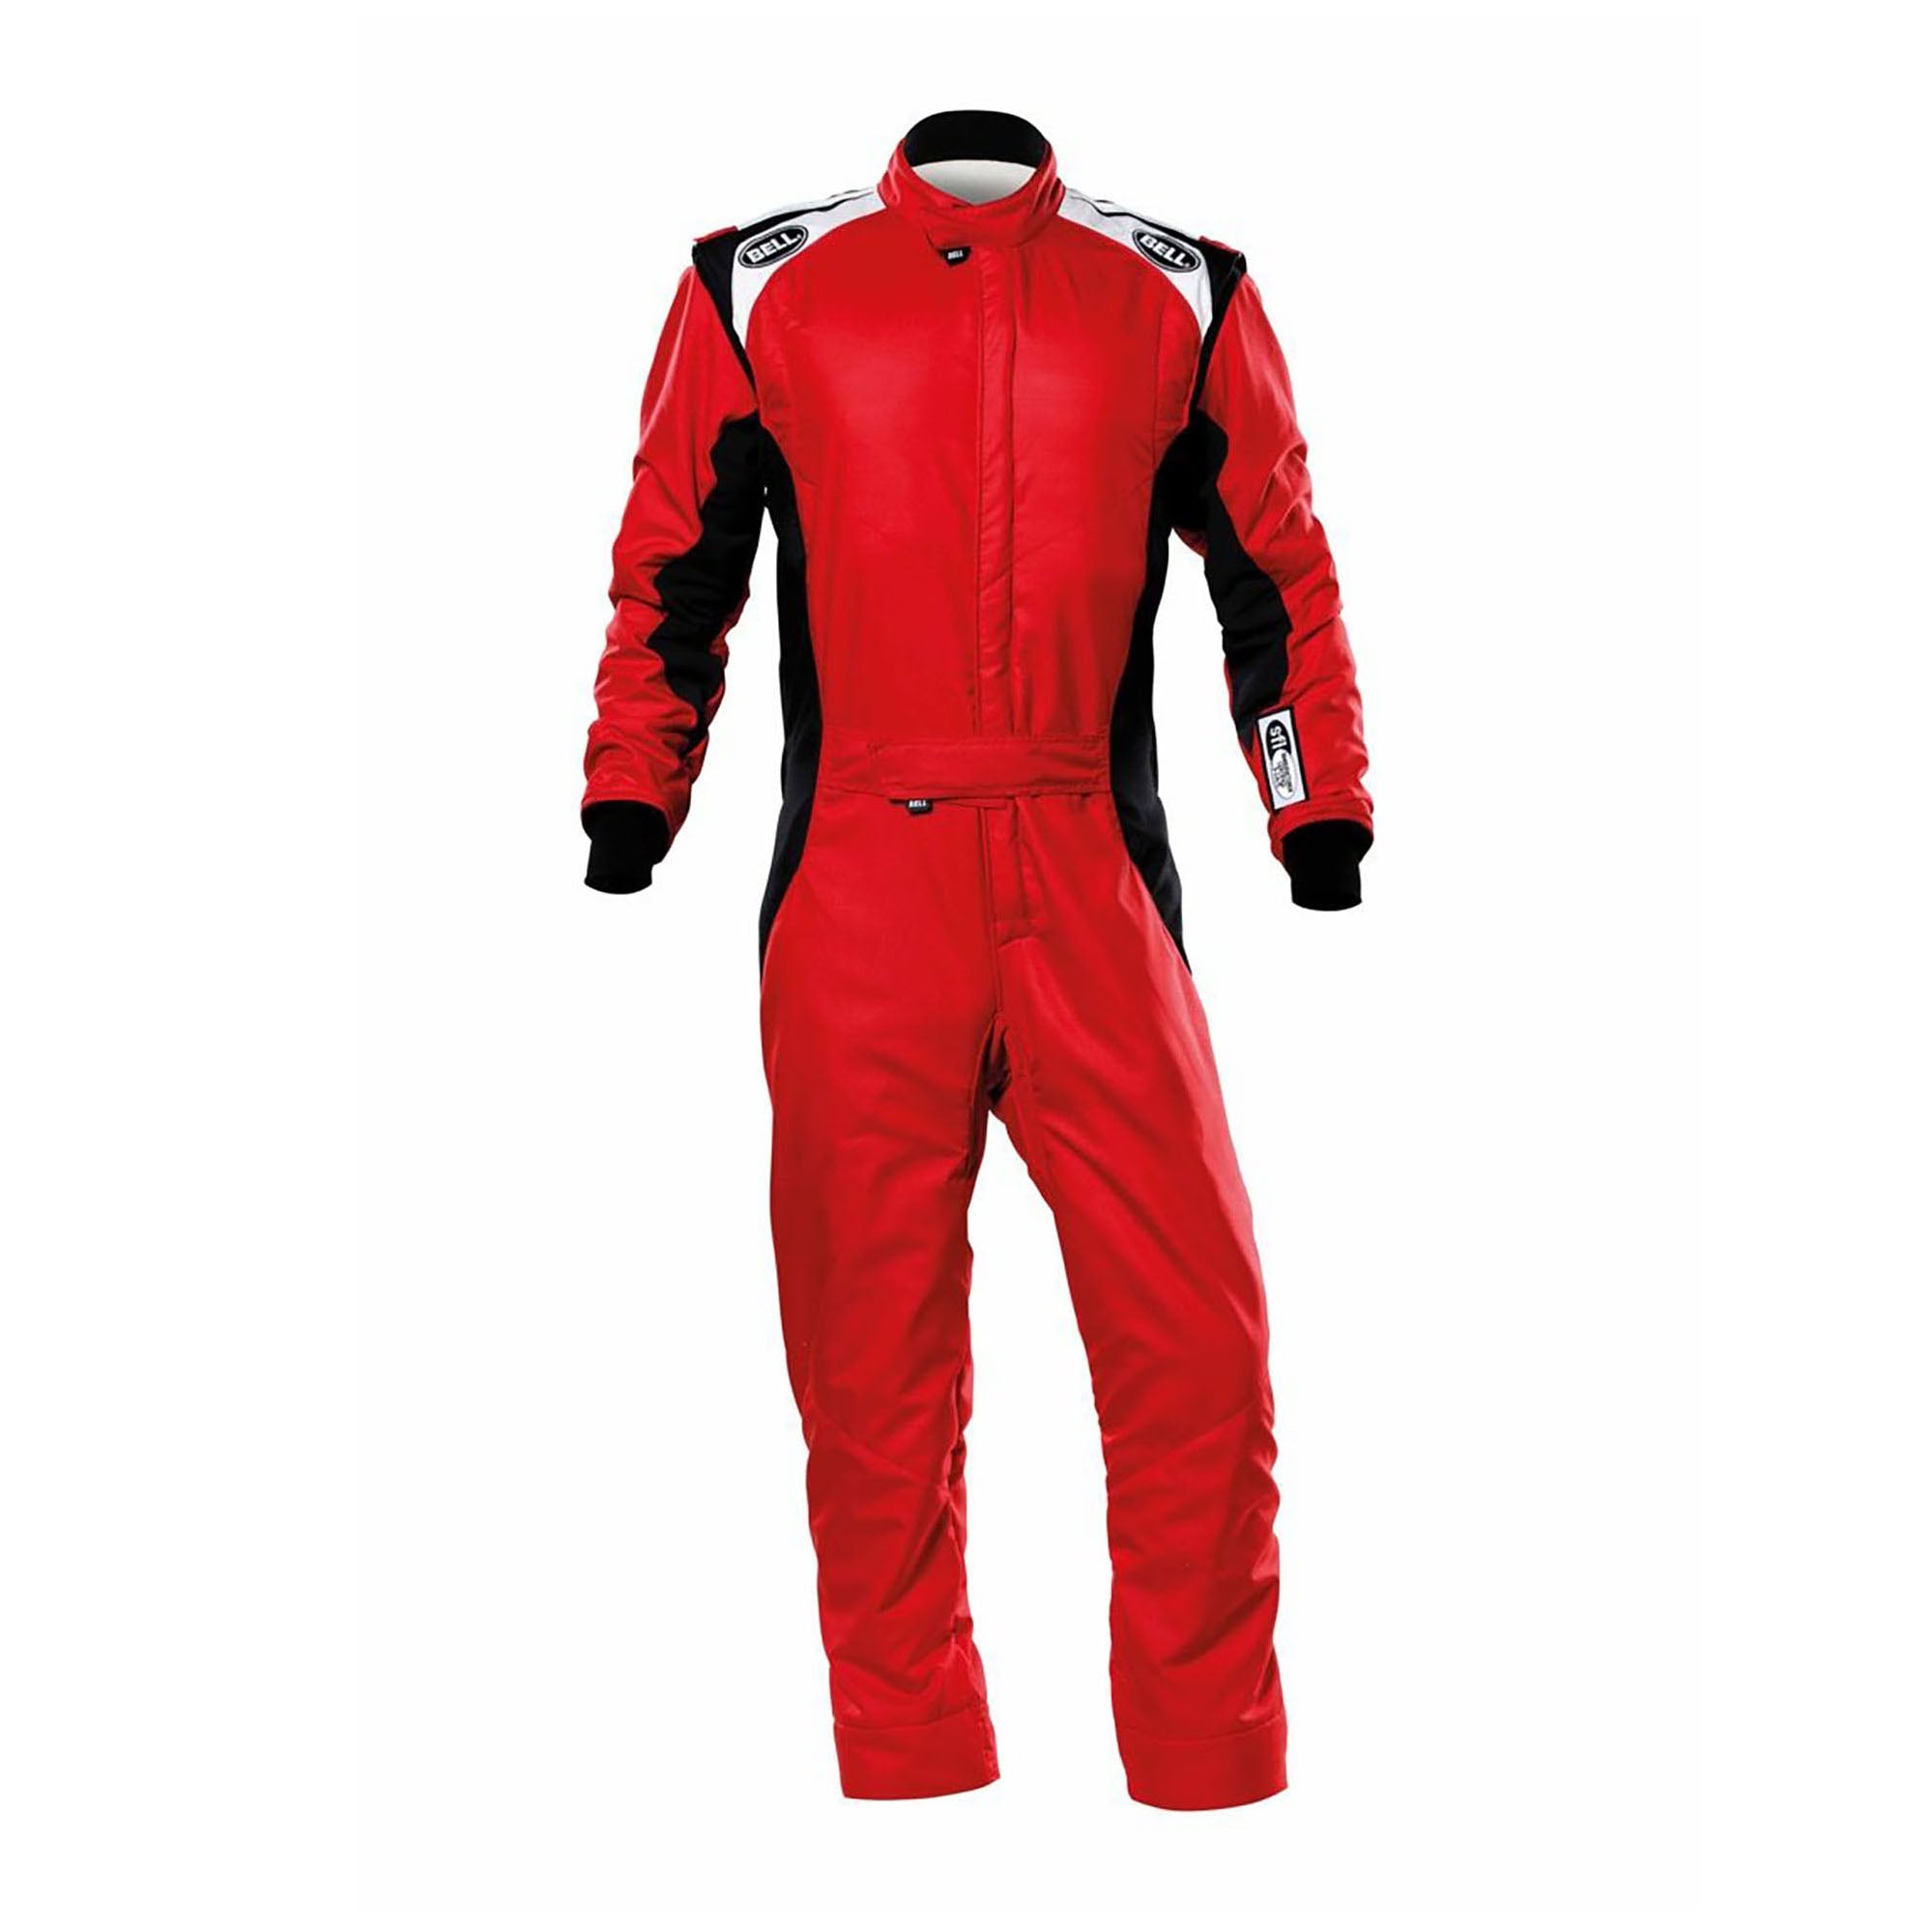 Bell ADV-TX Racing Suit